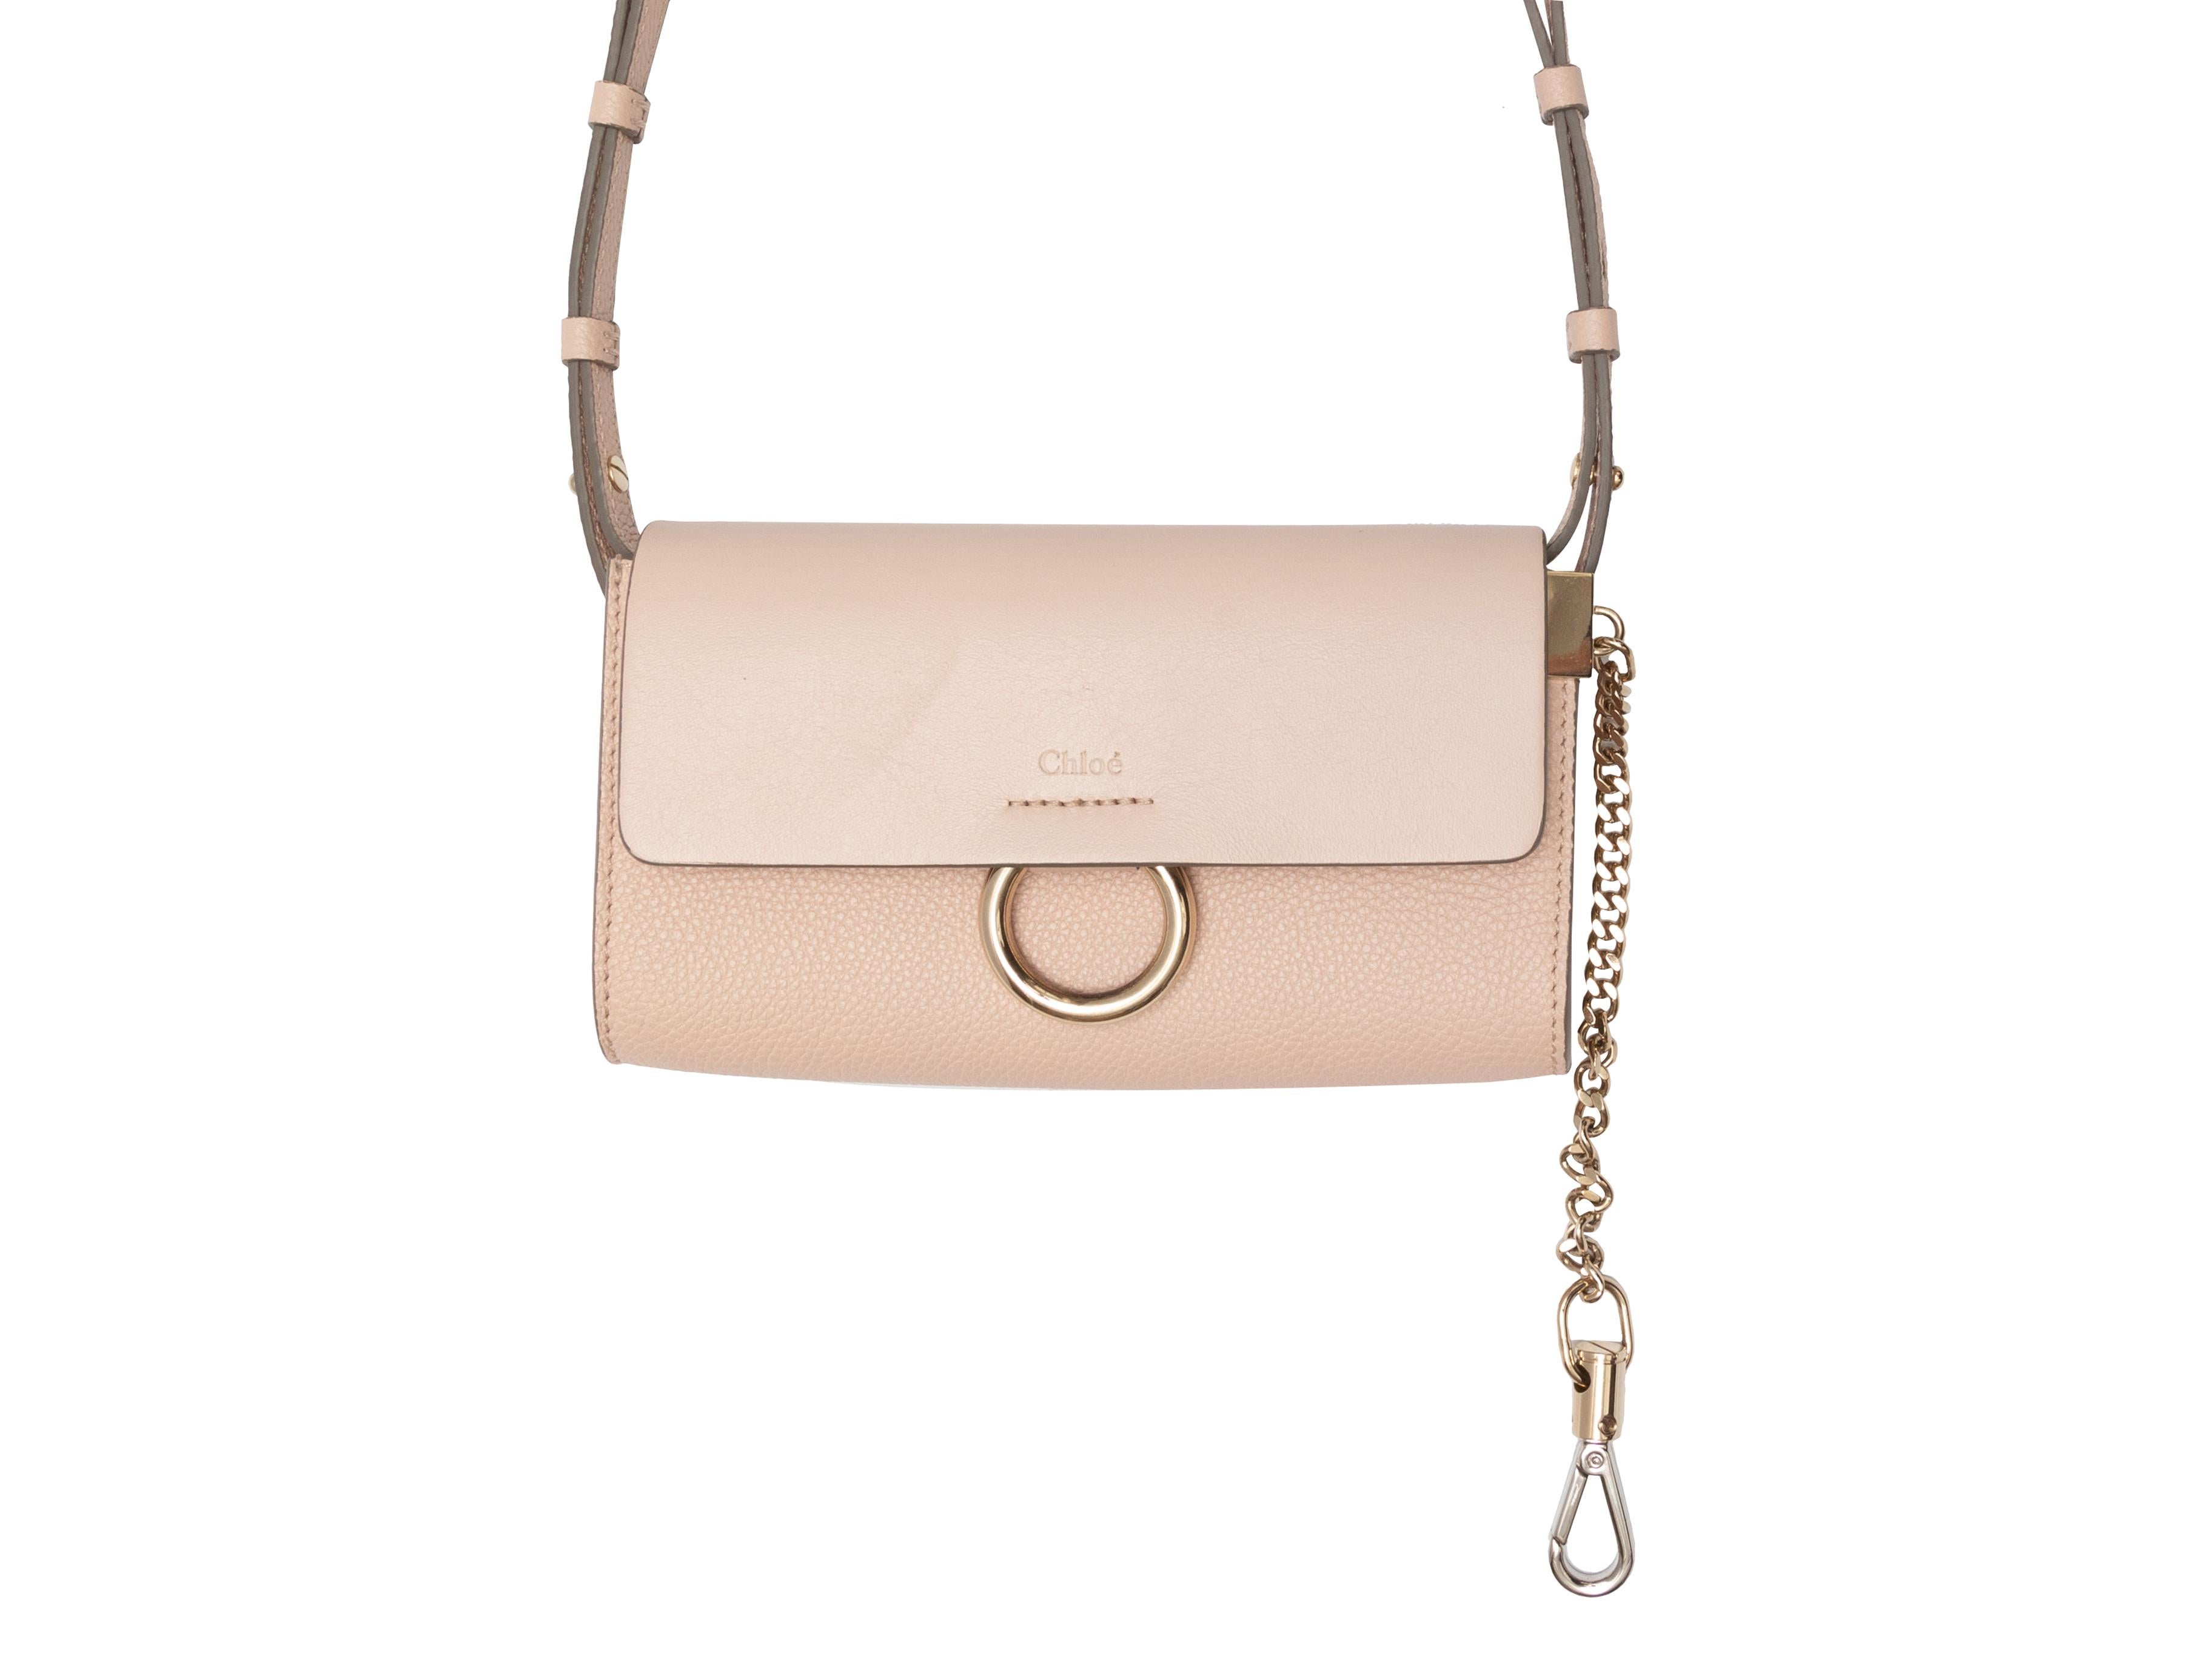 Blush Chloe Small Leather Crossbody Bag. This crossbody bag features a leather body, gold-tone hardware, multiple interior card and cash slots, single flat adjustable crossbody strap, and a top flap closure. 7